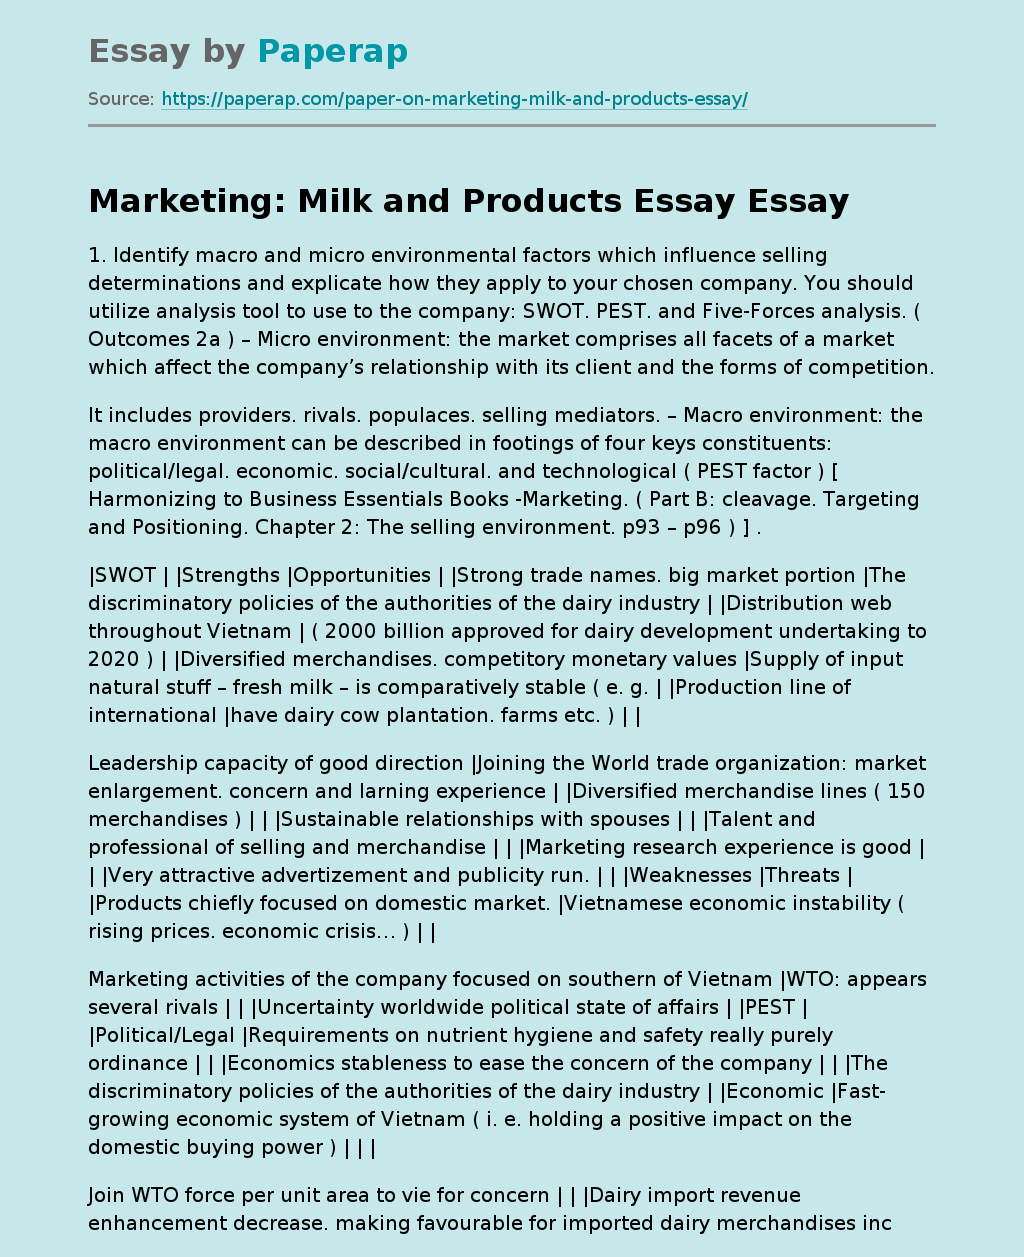 Marketing: Research on Milk and Dairy Products